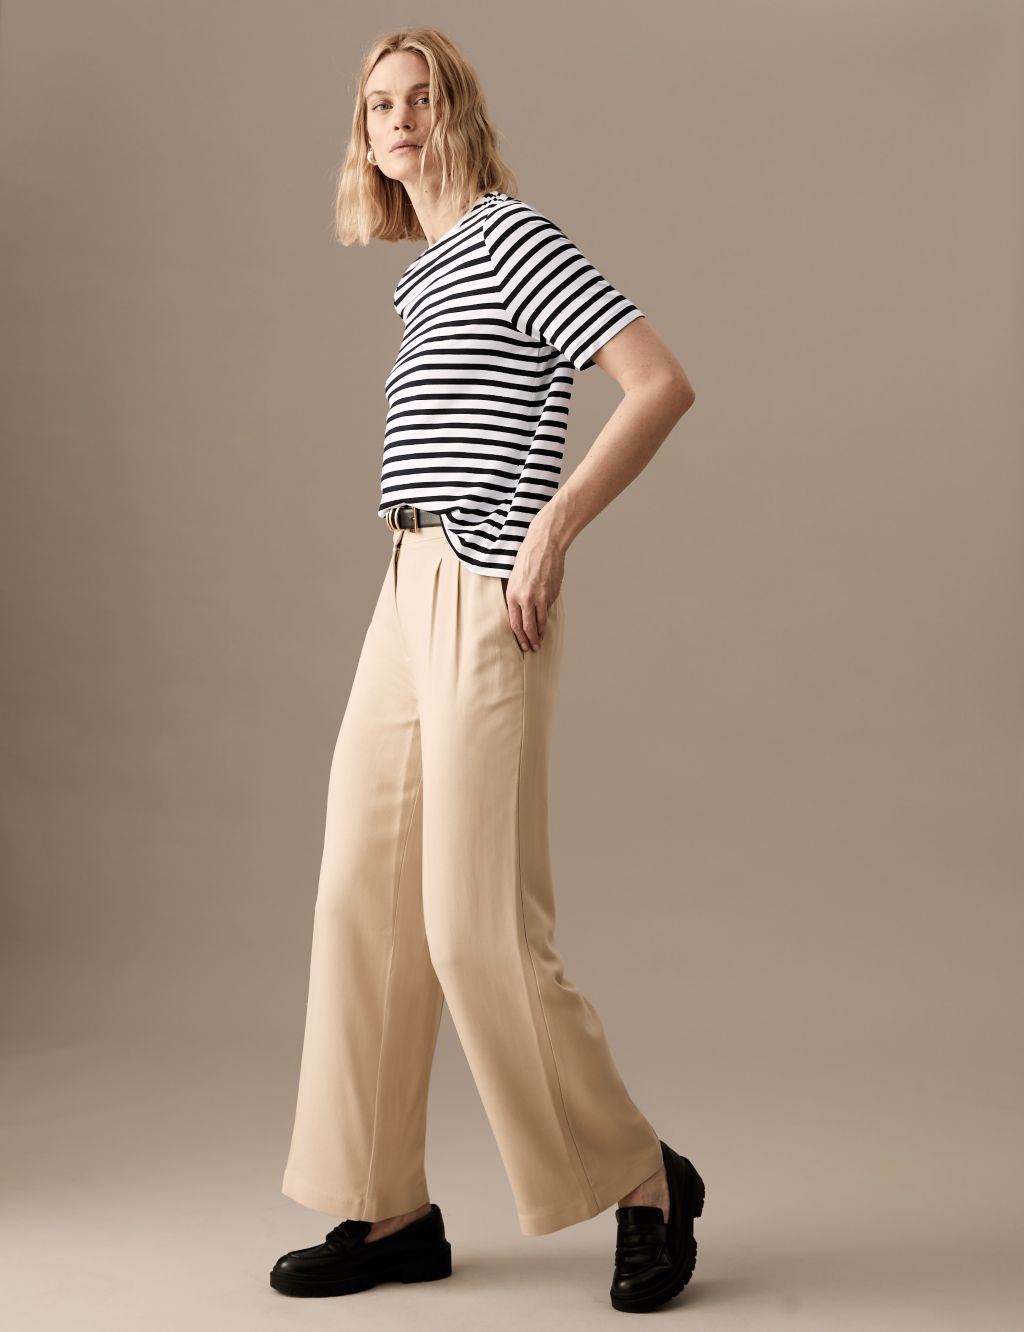 Jersey Striped Round Neck Relaxed T-Shirt image 3